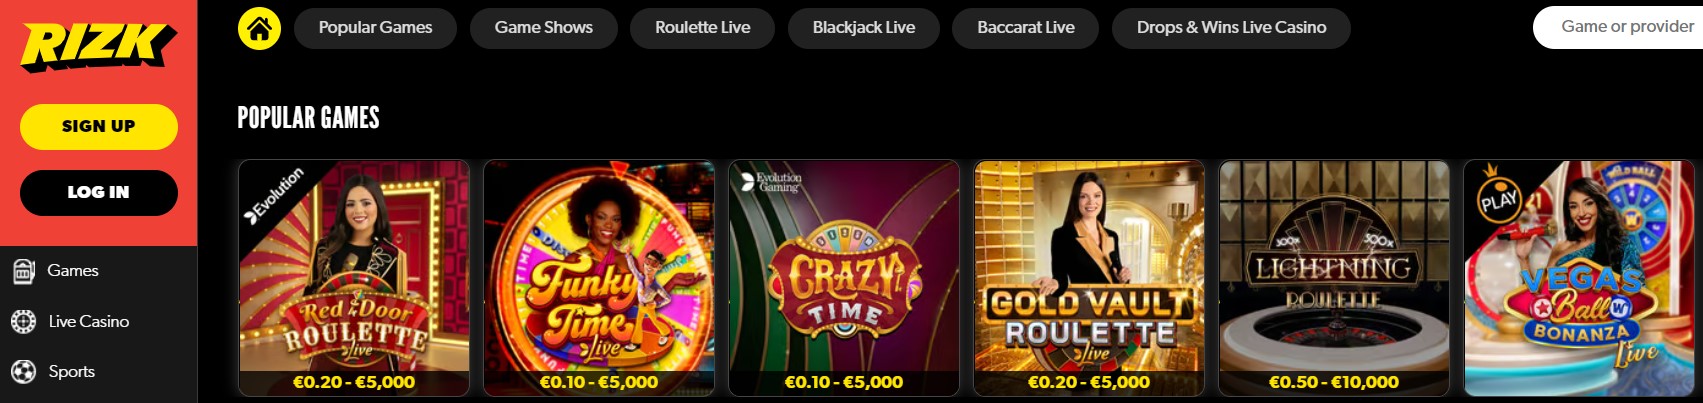 Live Casino: High-Definition Interactive Gaming